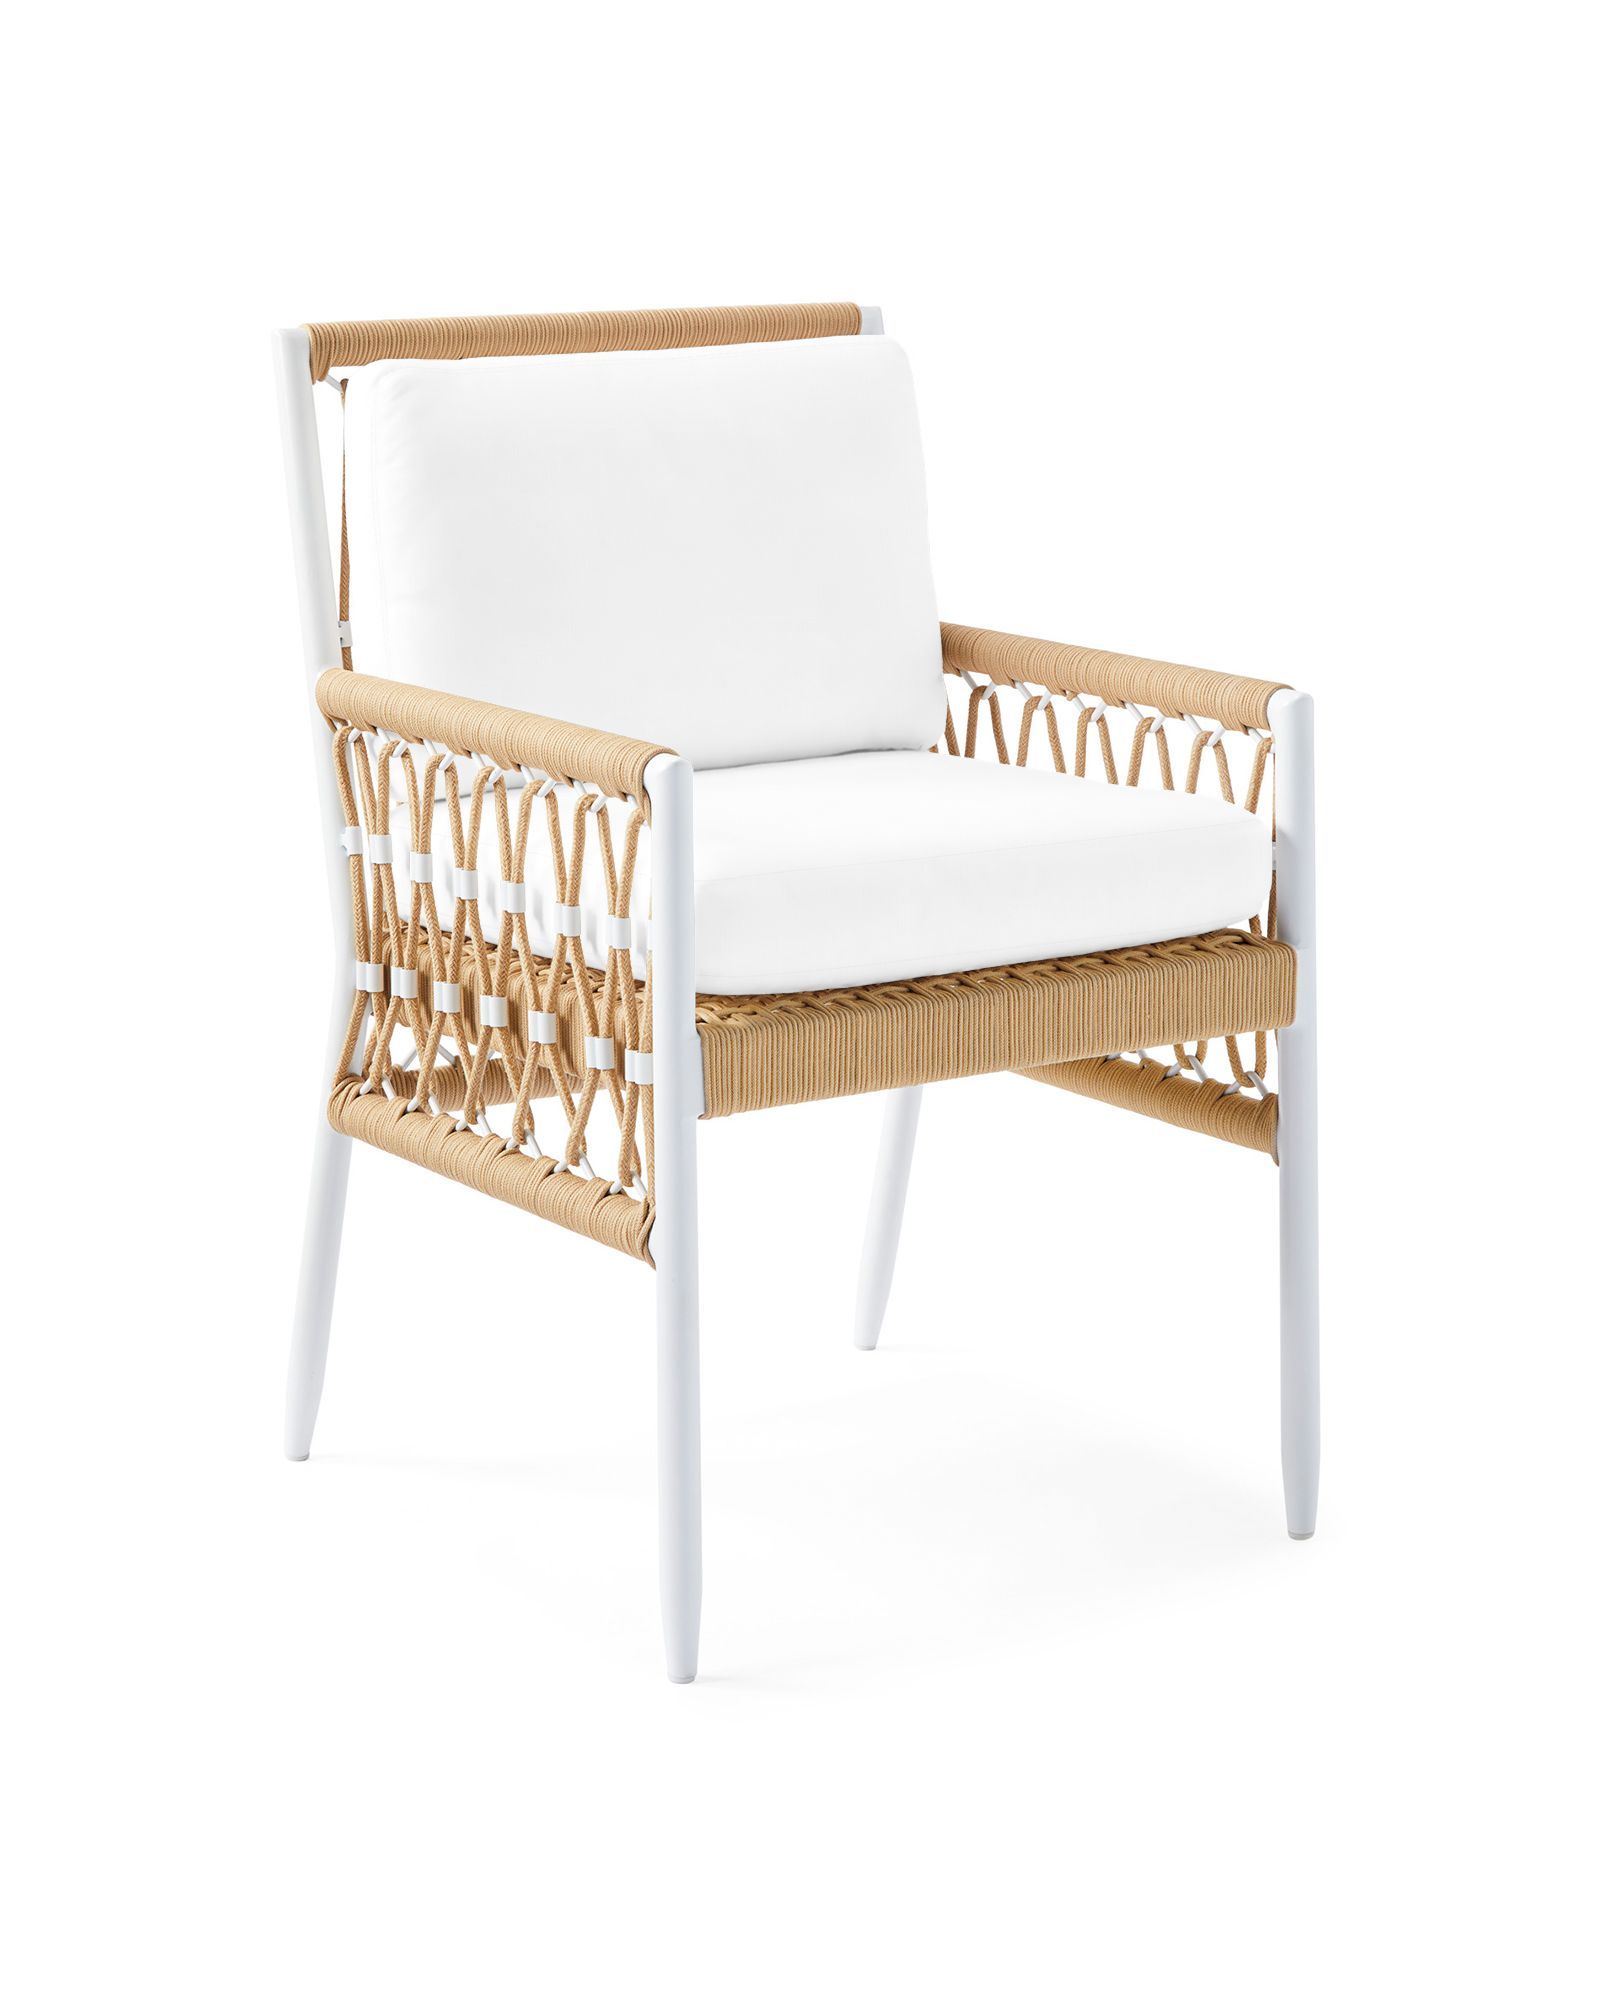 Salt Creek Dining Chair - Light Dune | Serena and Lily